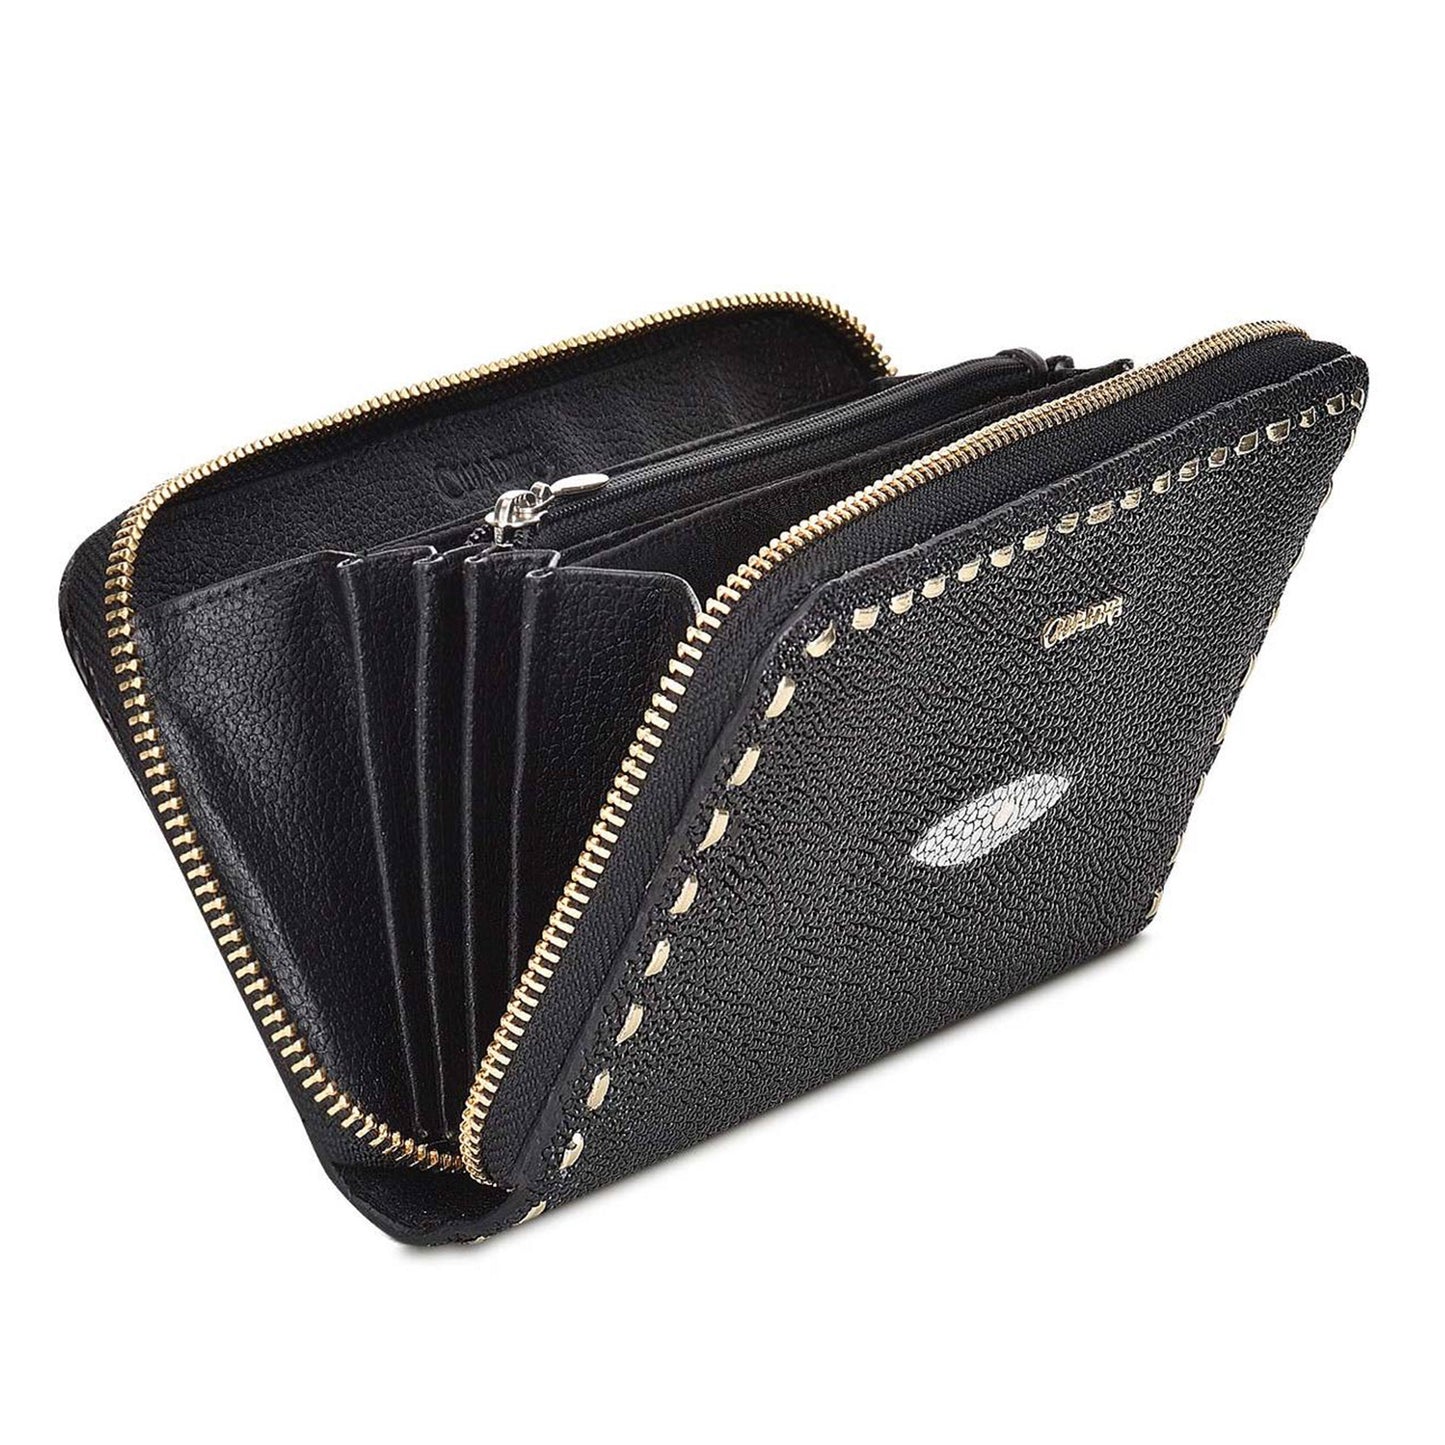 Inside the wallet, four spacious compartments for cash and eight card slots.